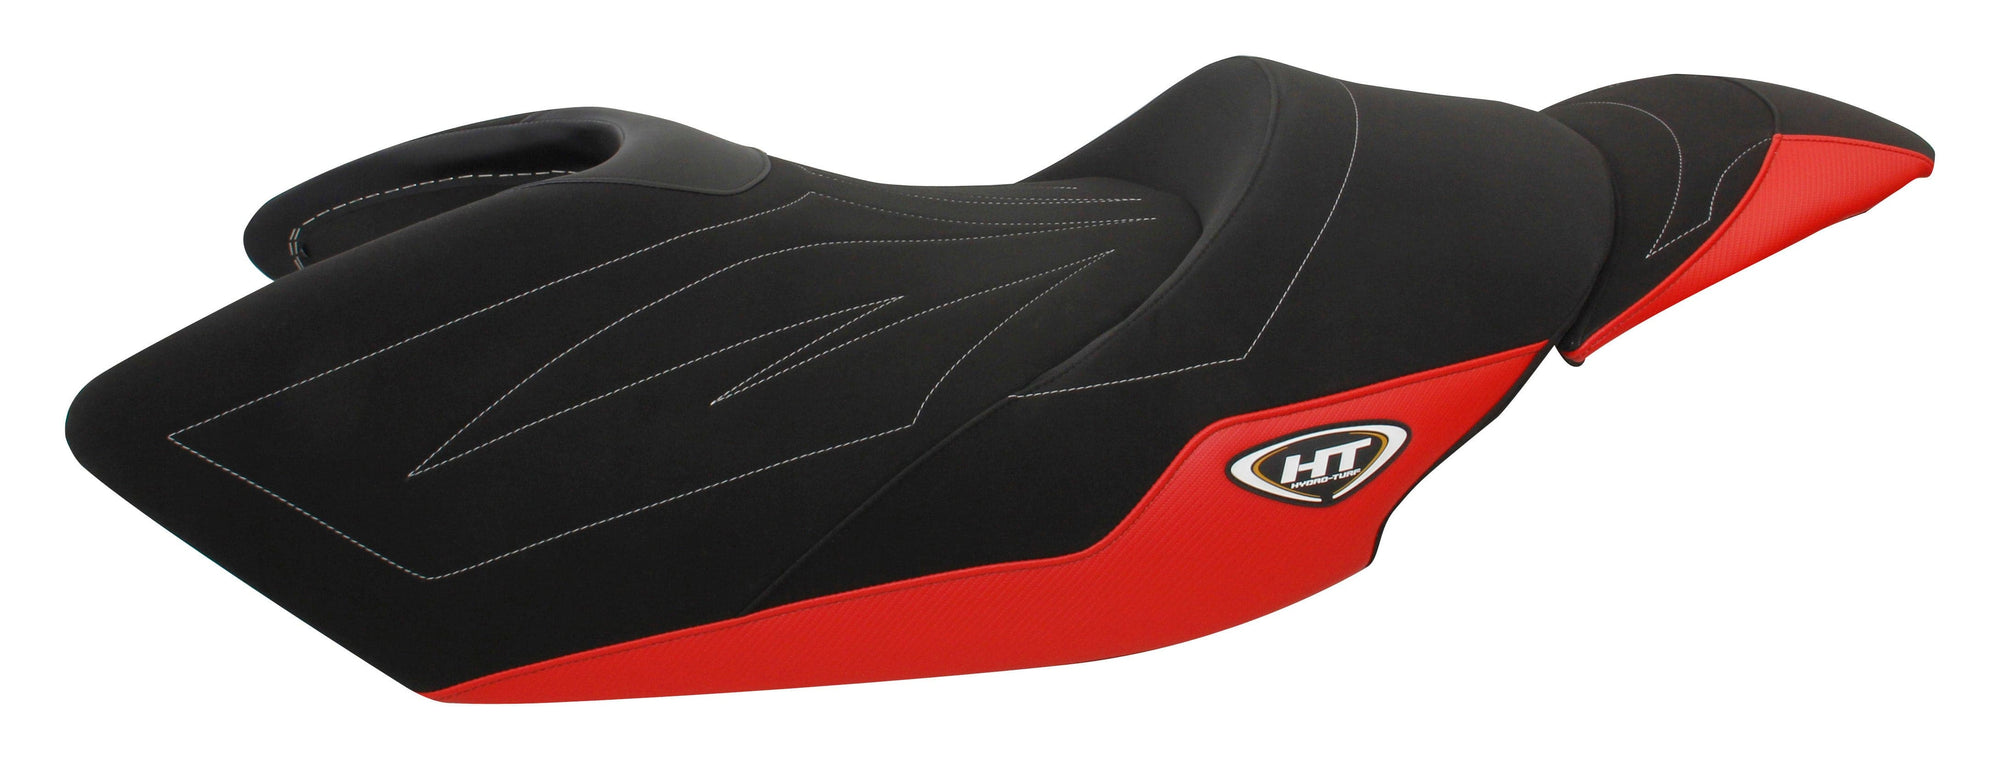 Hydro-Turf Premier Seat Cover for Yamaha FZR (12-16) Colorway B